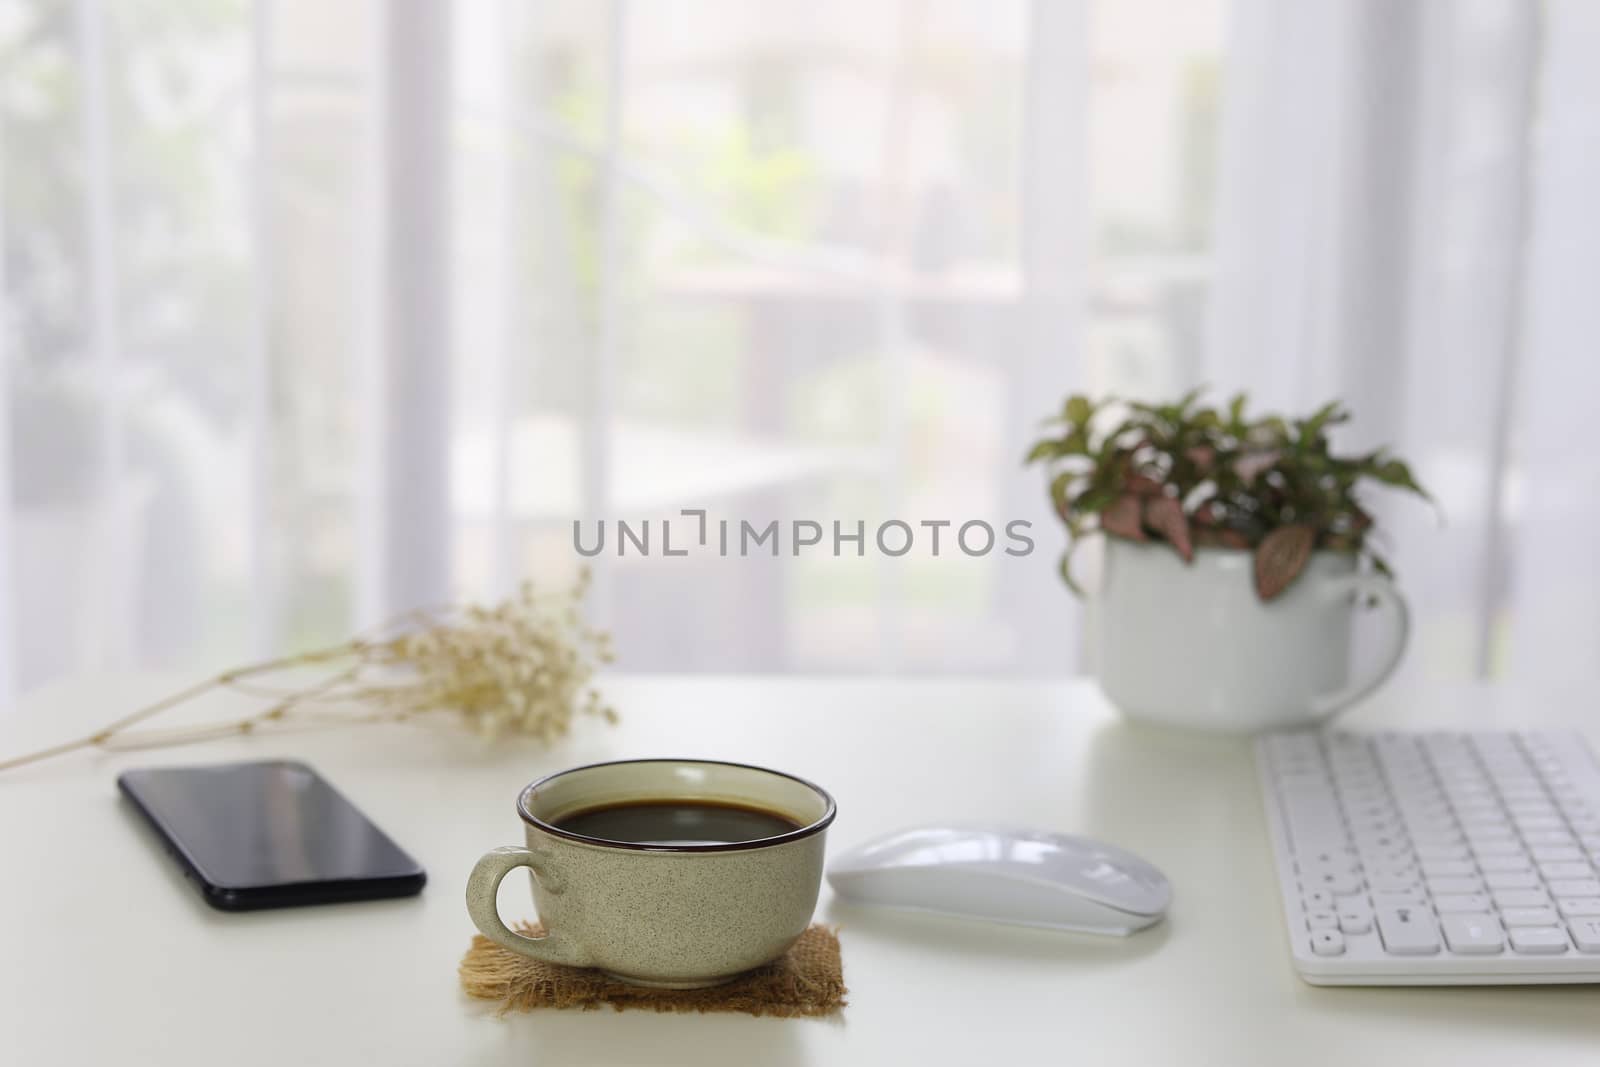 Interior house modern decor with smartphone coffee and white keaboard and mouse and plants pot with see through curtain